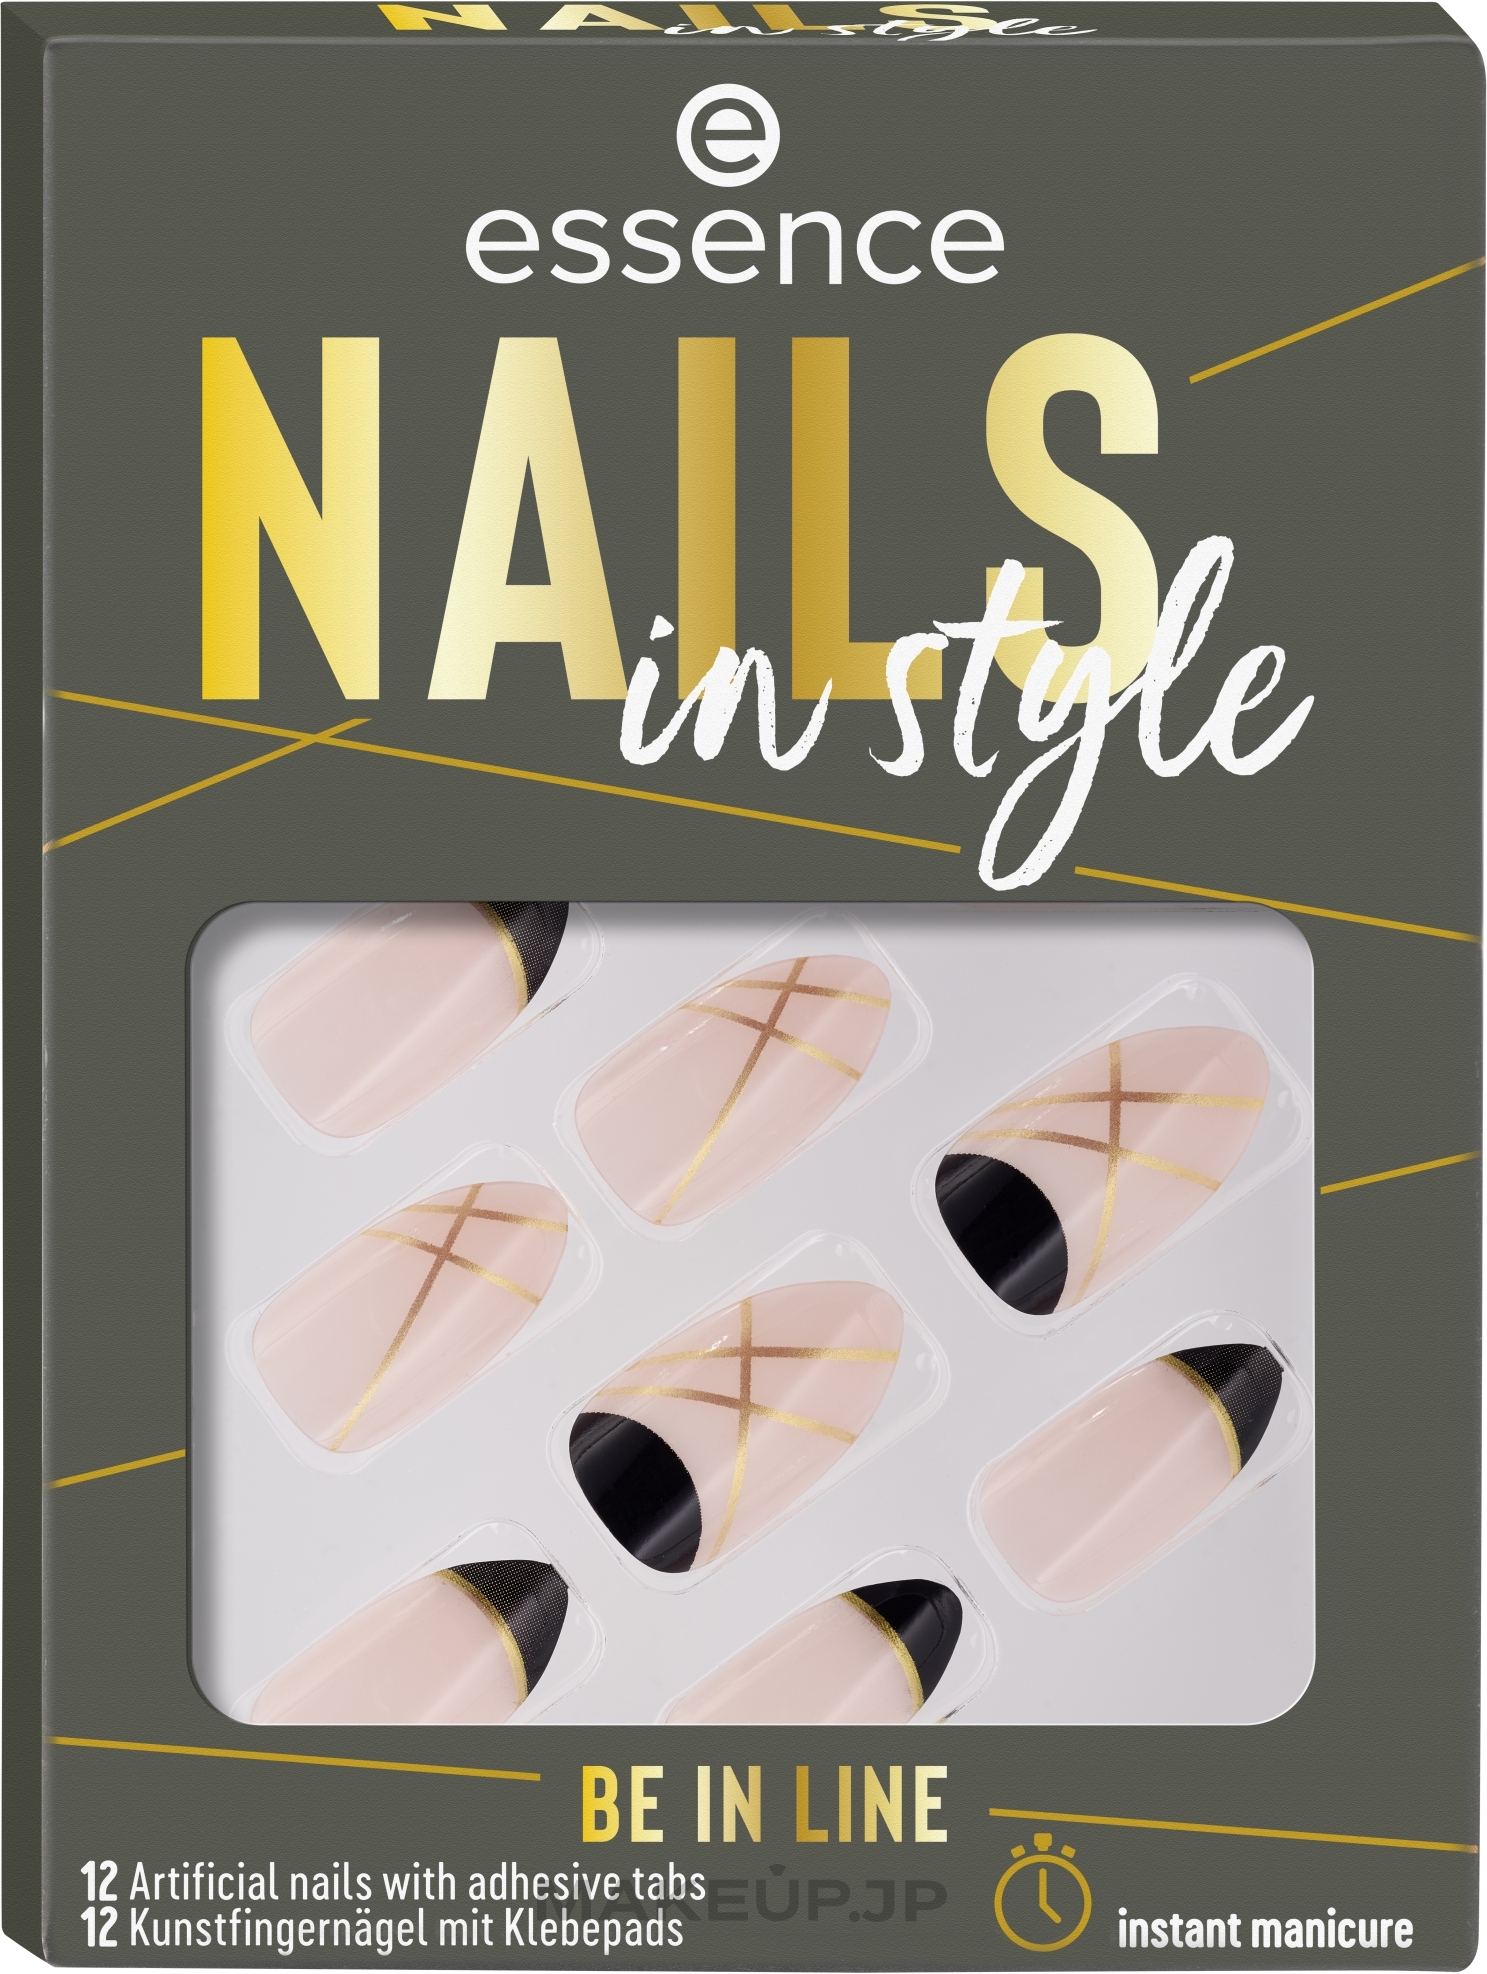 Adhesive False Nails - Essence Nails In Style Be In Line — photo 12 szt.